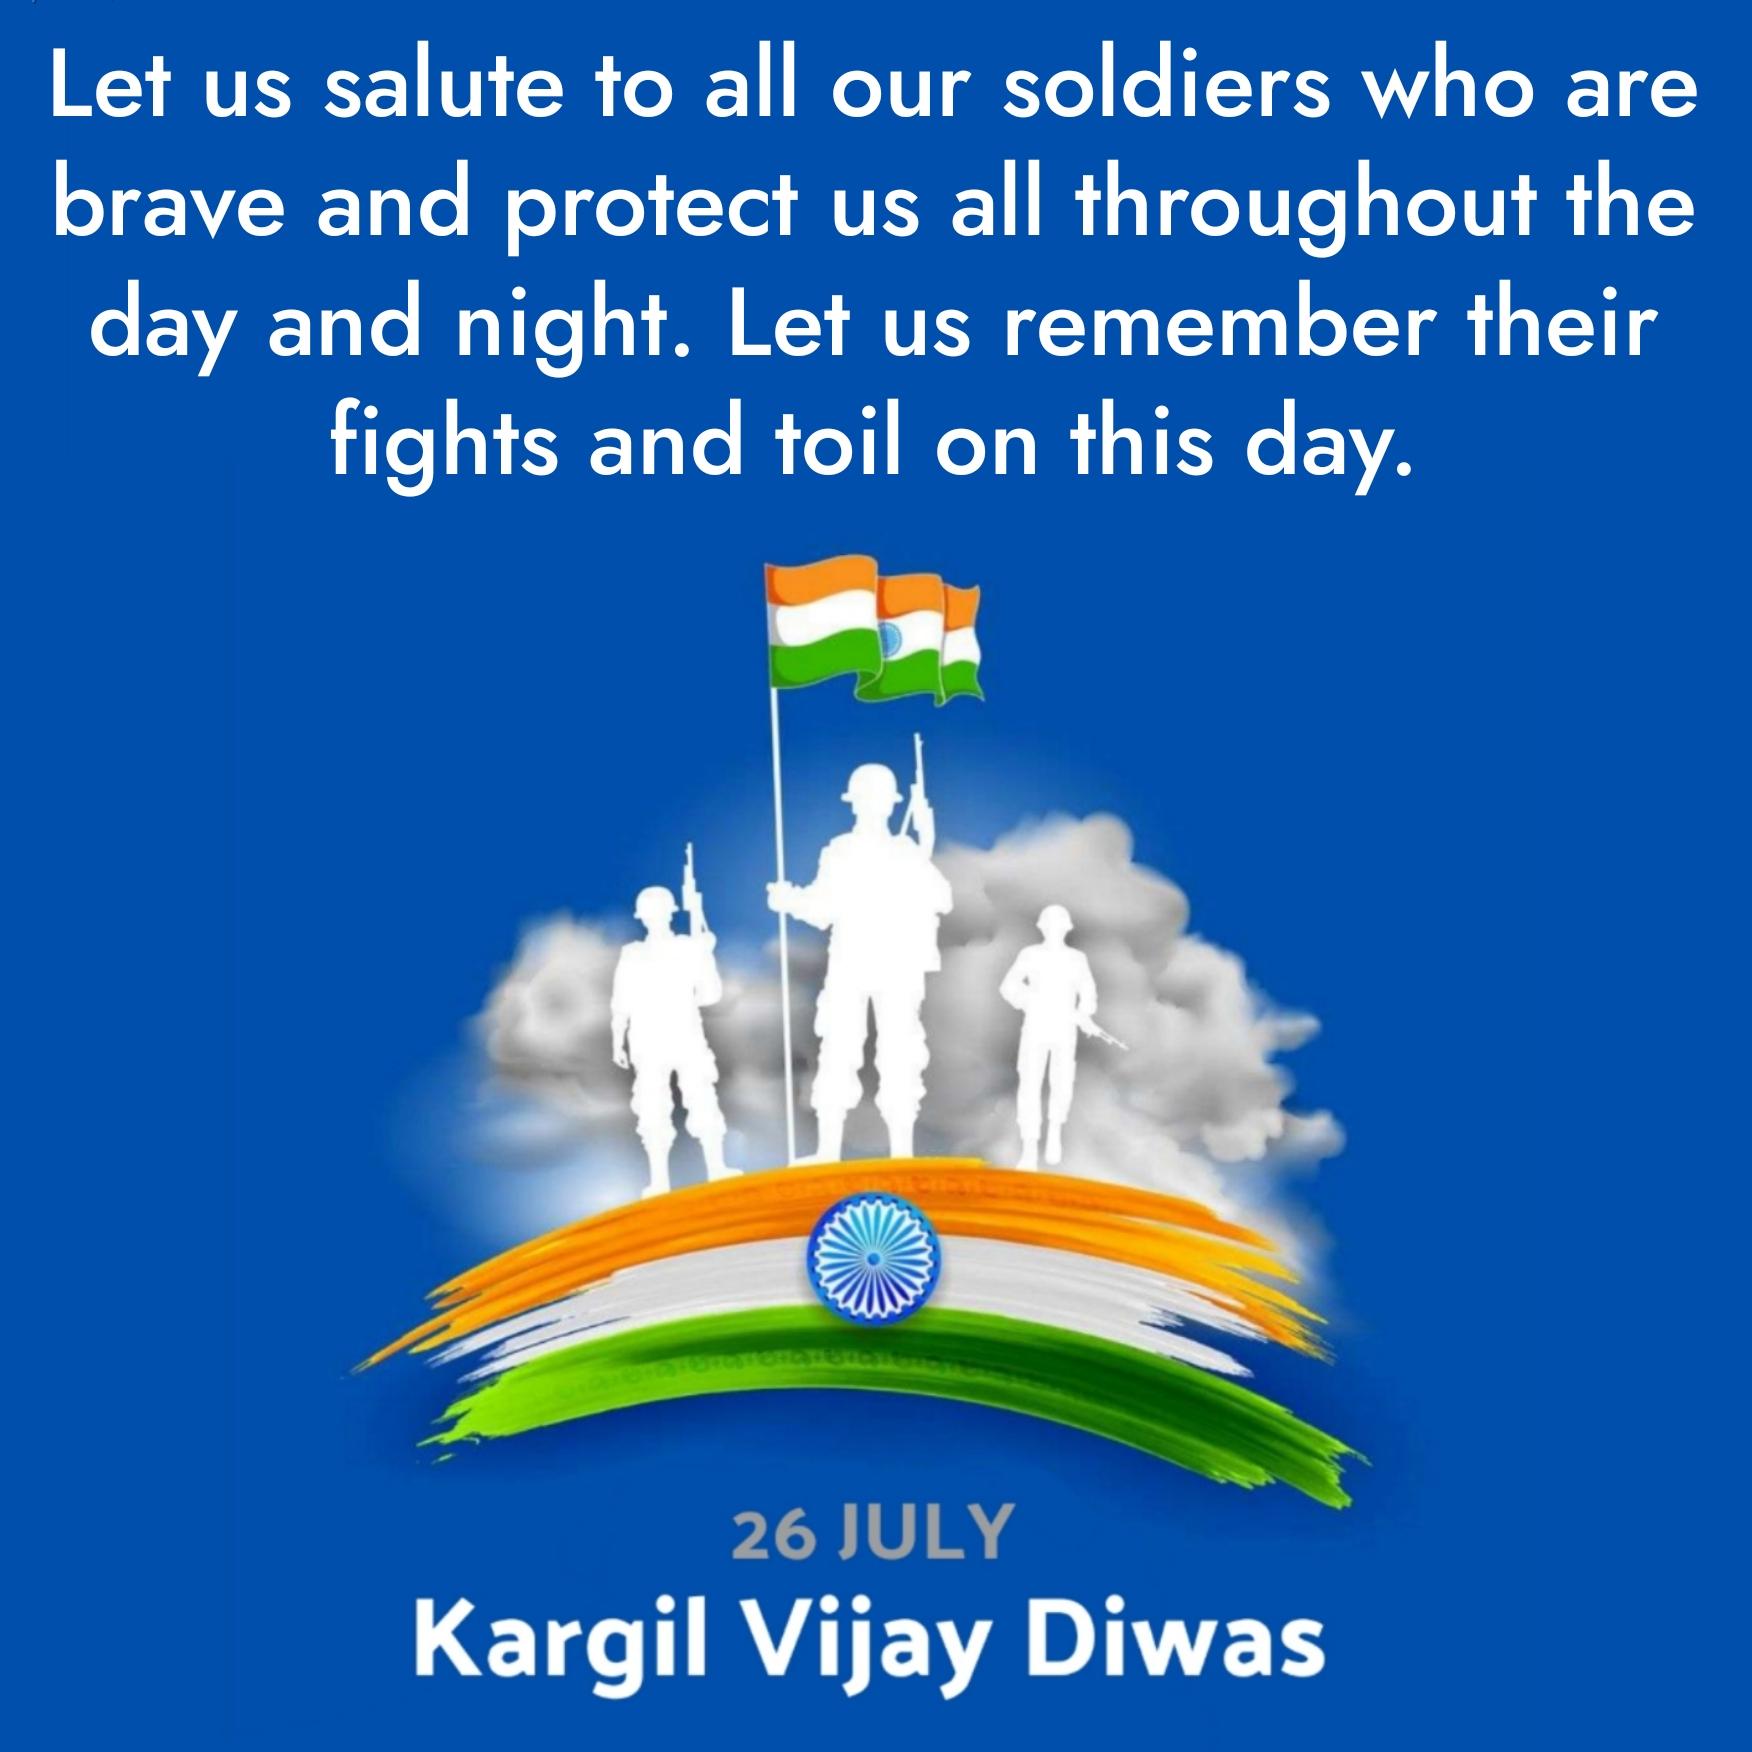 Let us salute to all our soldiers who are brave and protect us all